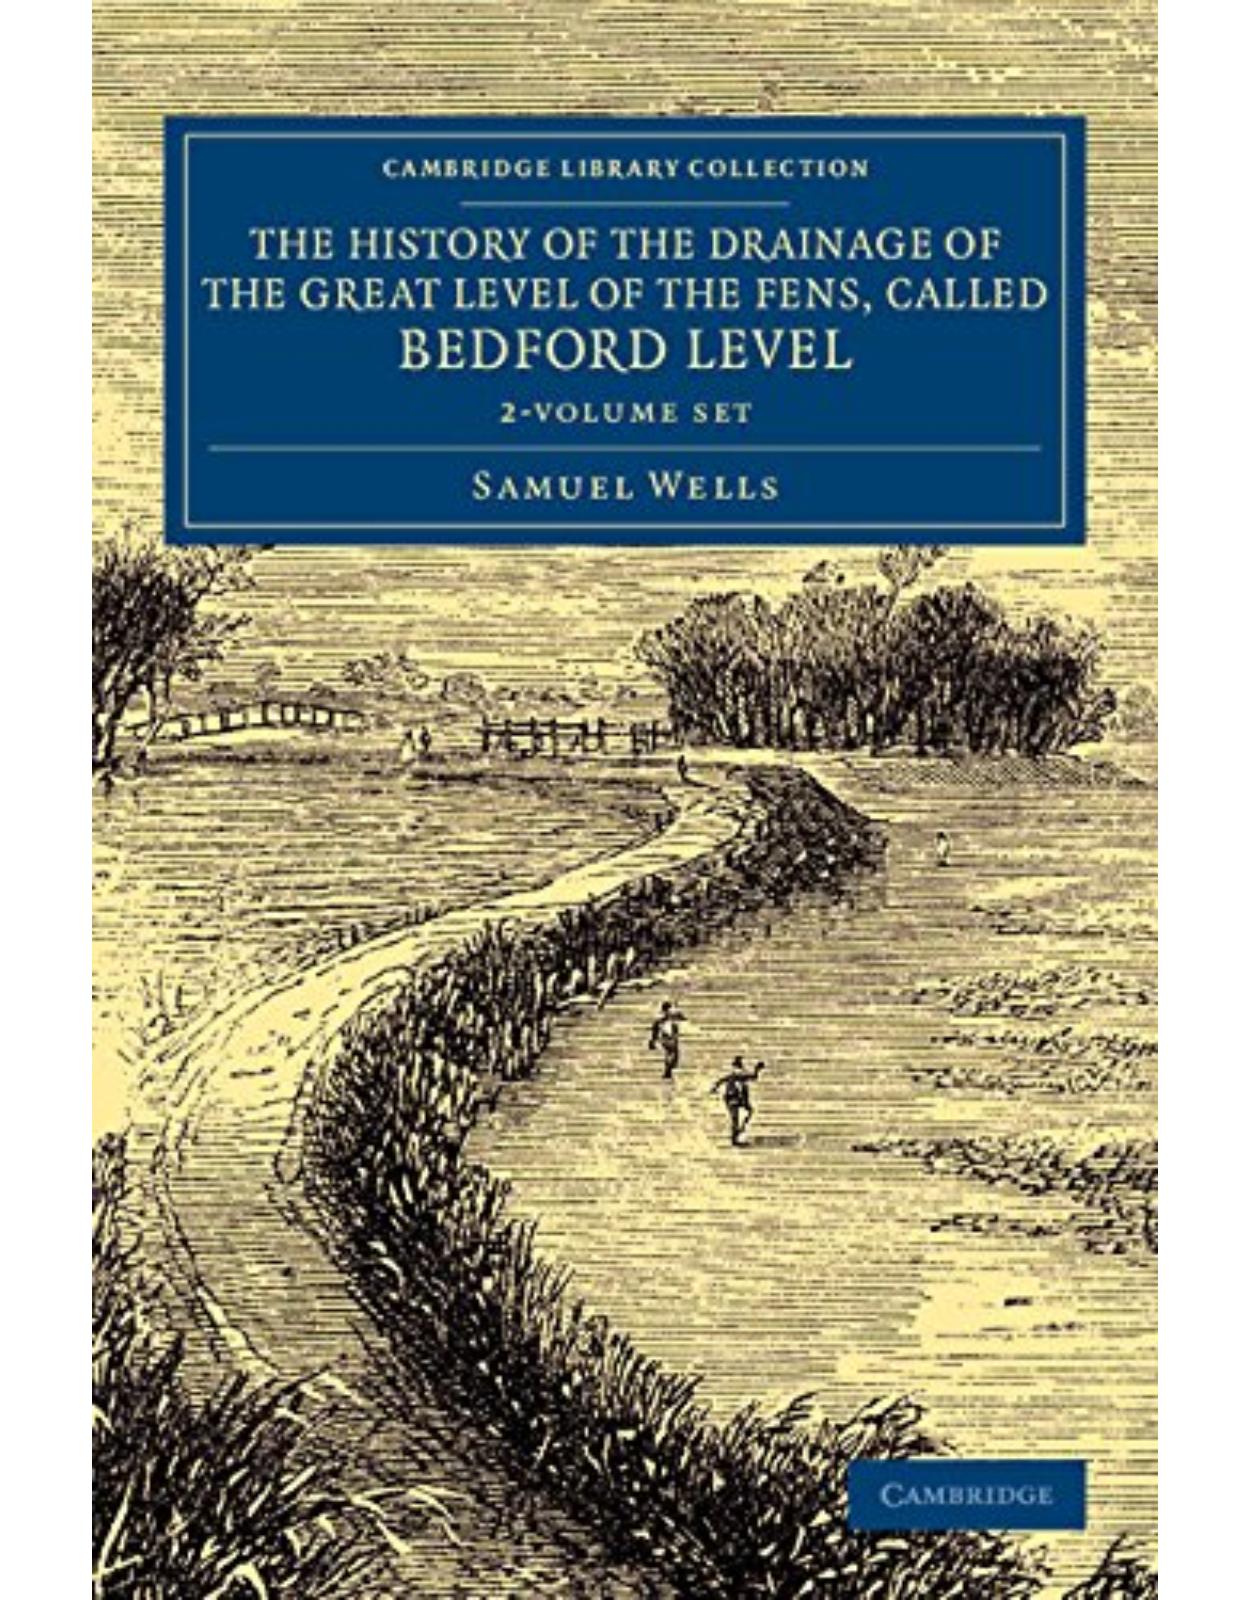 The History of the Drainage of the Great Level of the Fens, Called Bedford Level 2 Volume Set: With the Constitution and Laws of the Bedford Level ... (Cambridge Library Collection - Technology)